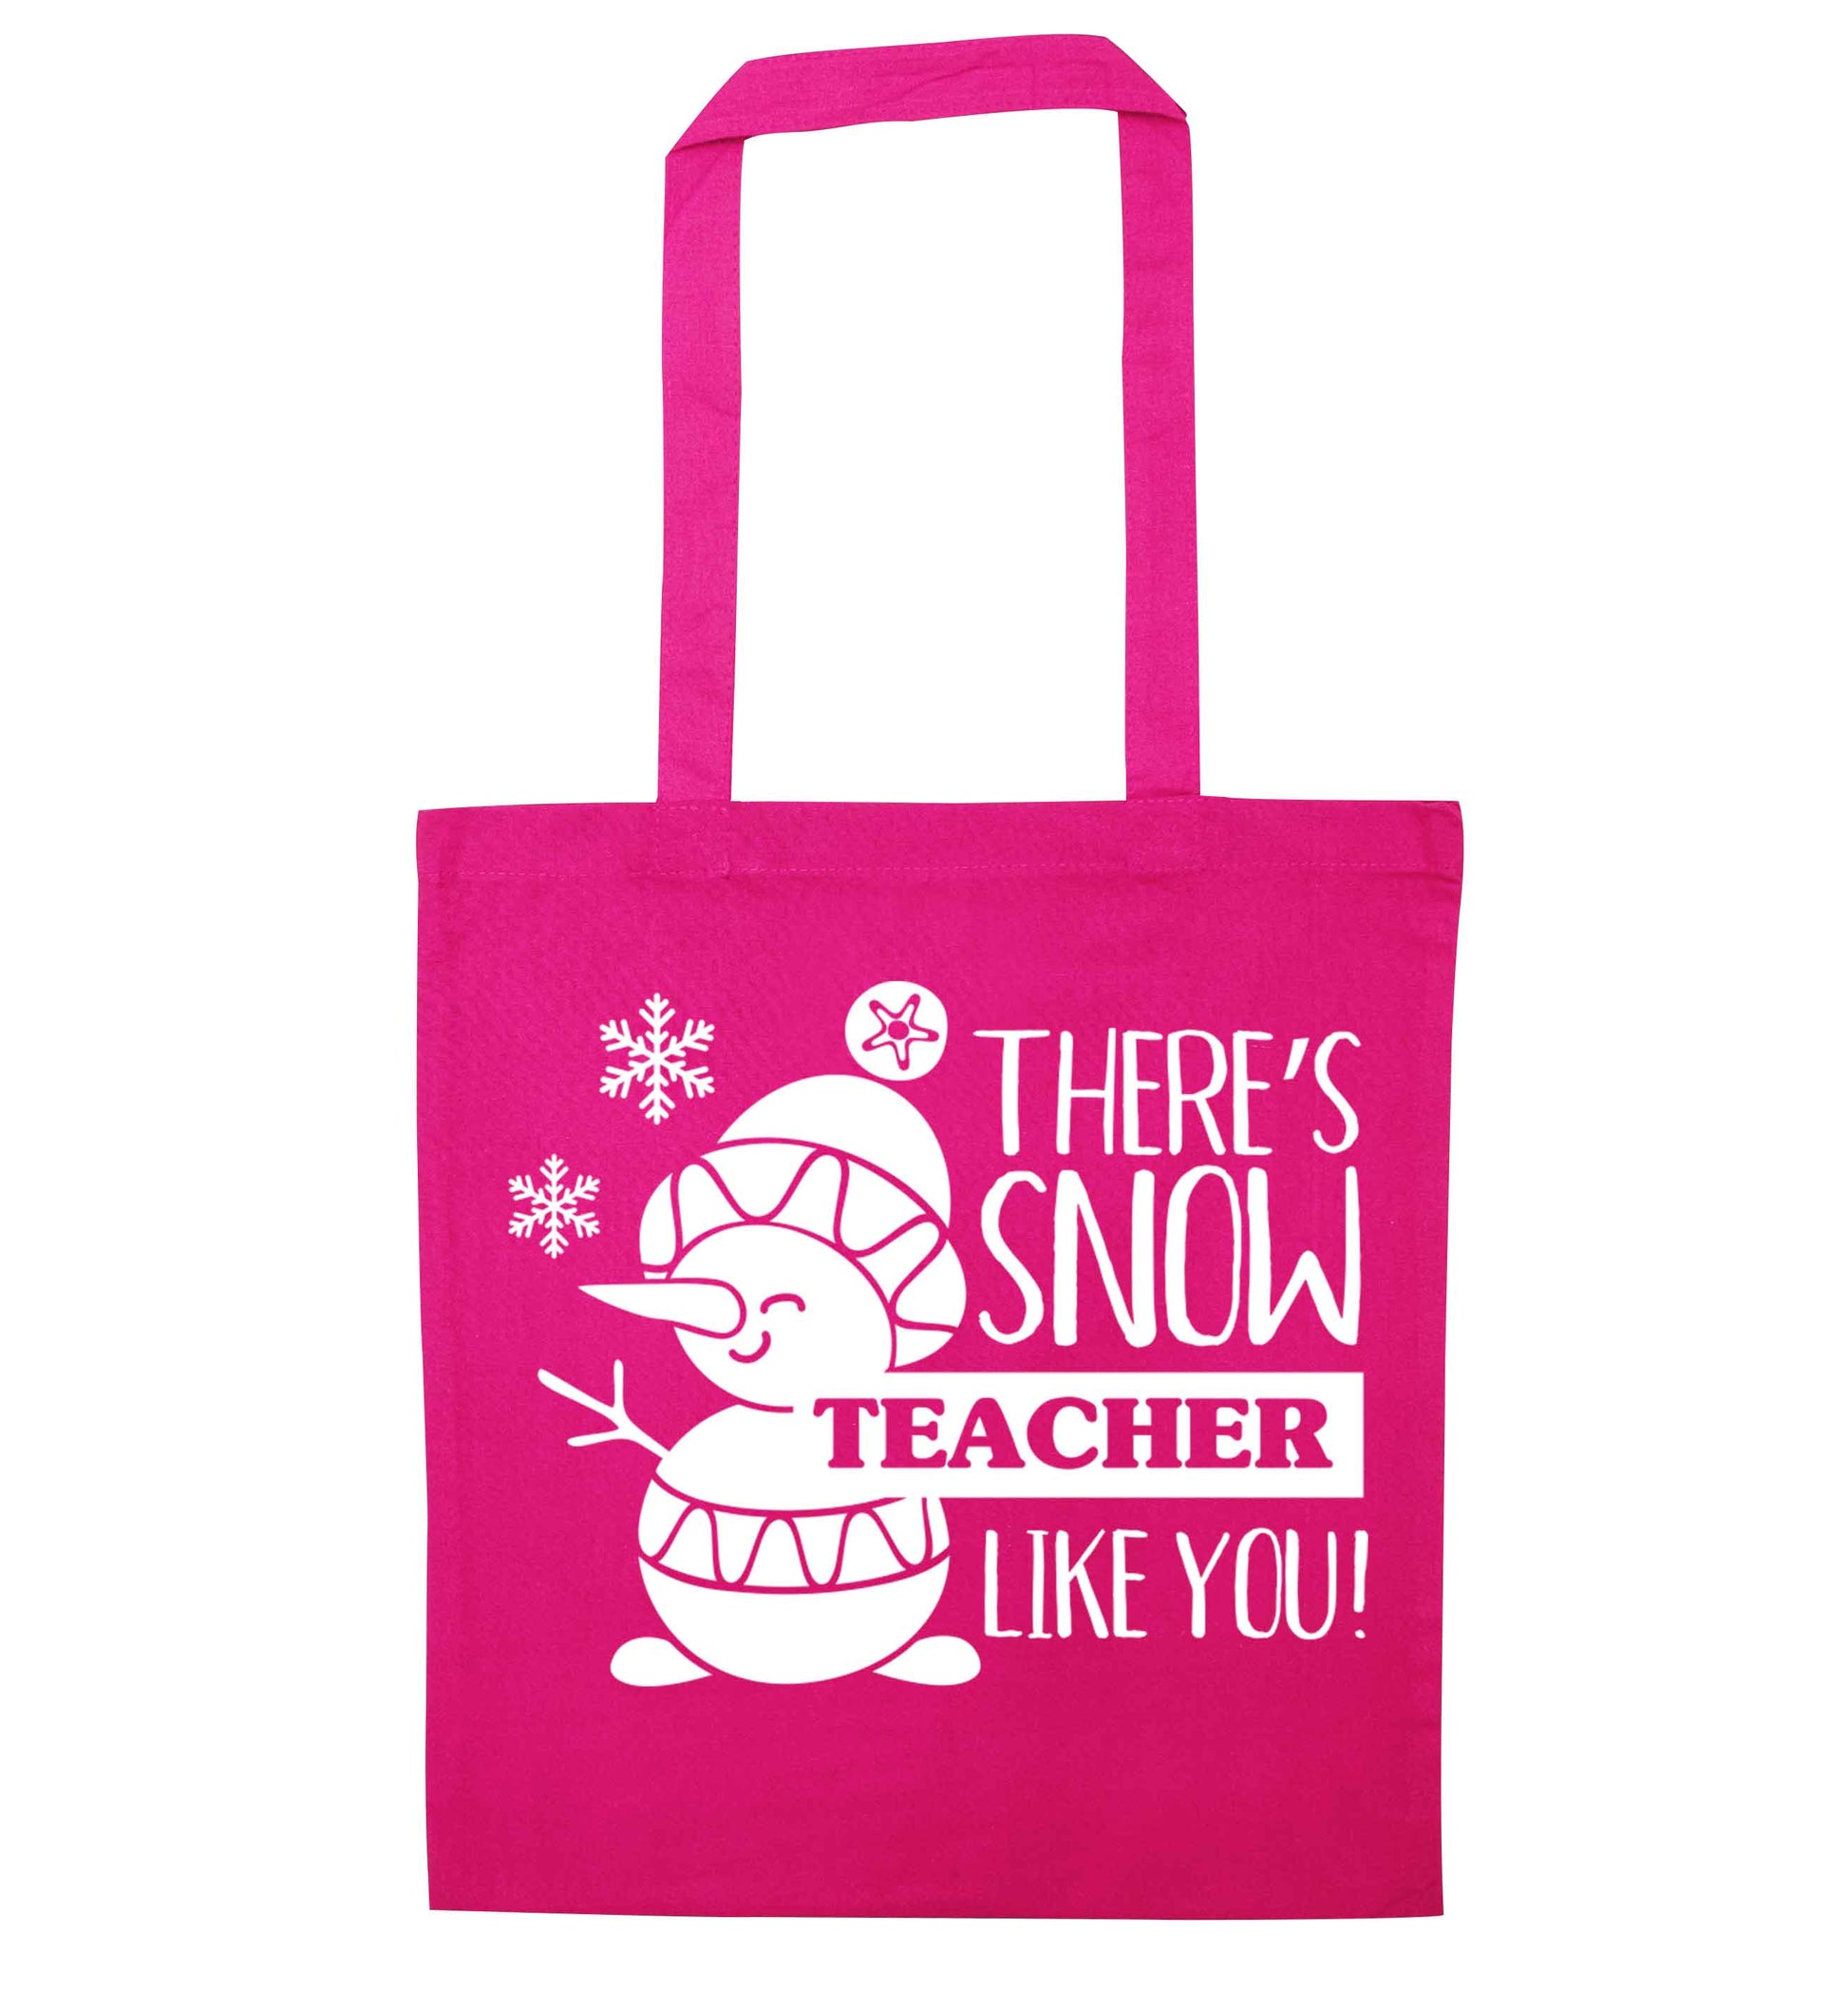 There's snow teacher like you pink tote bag